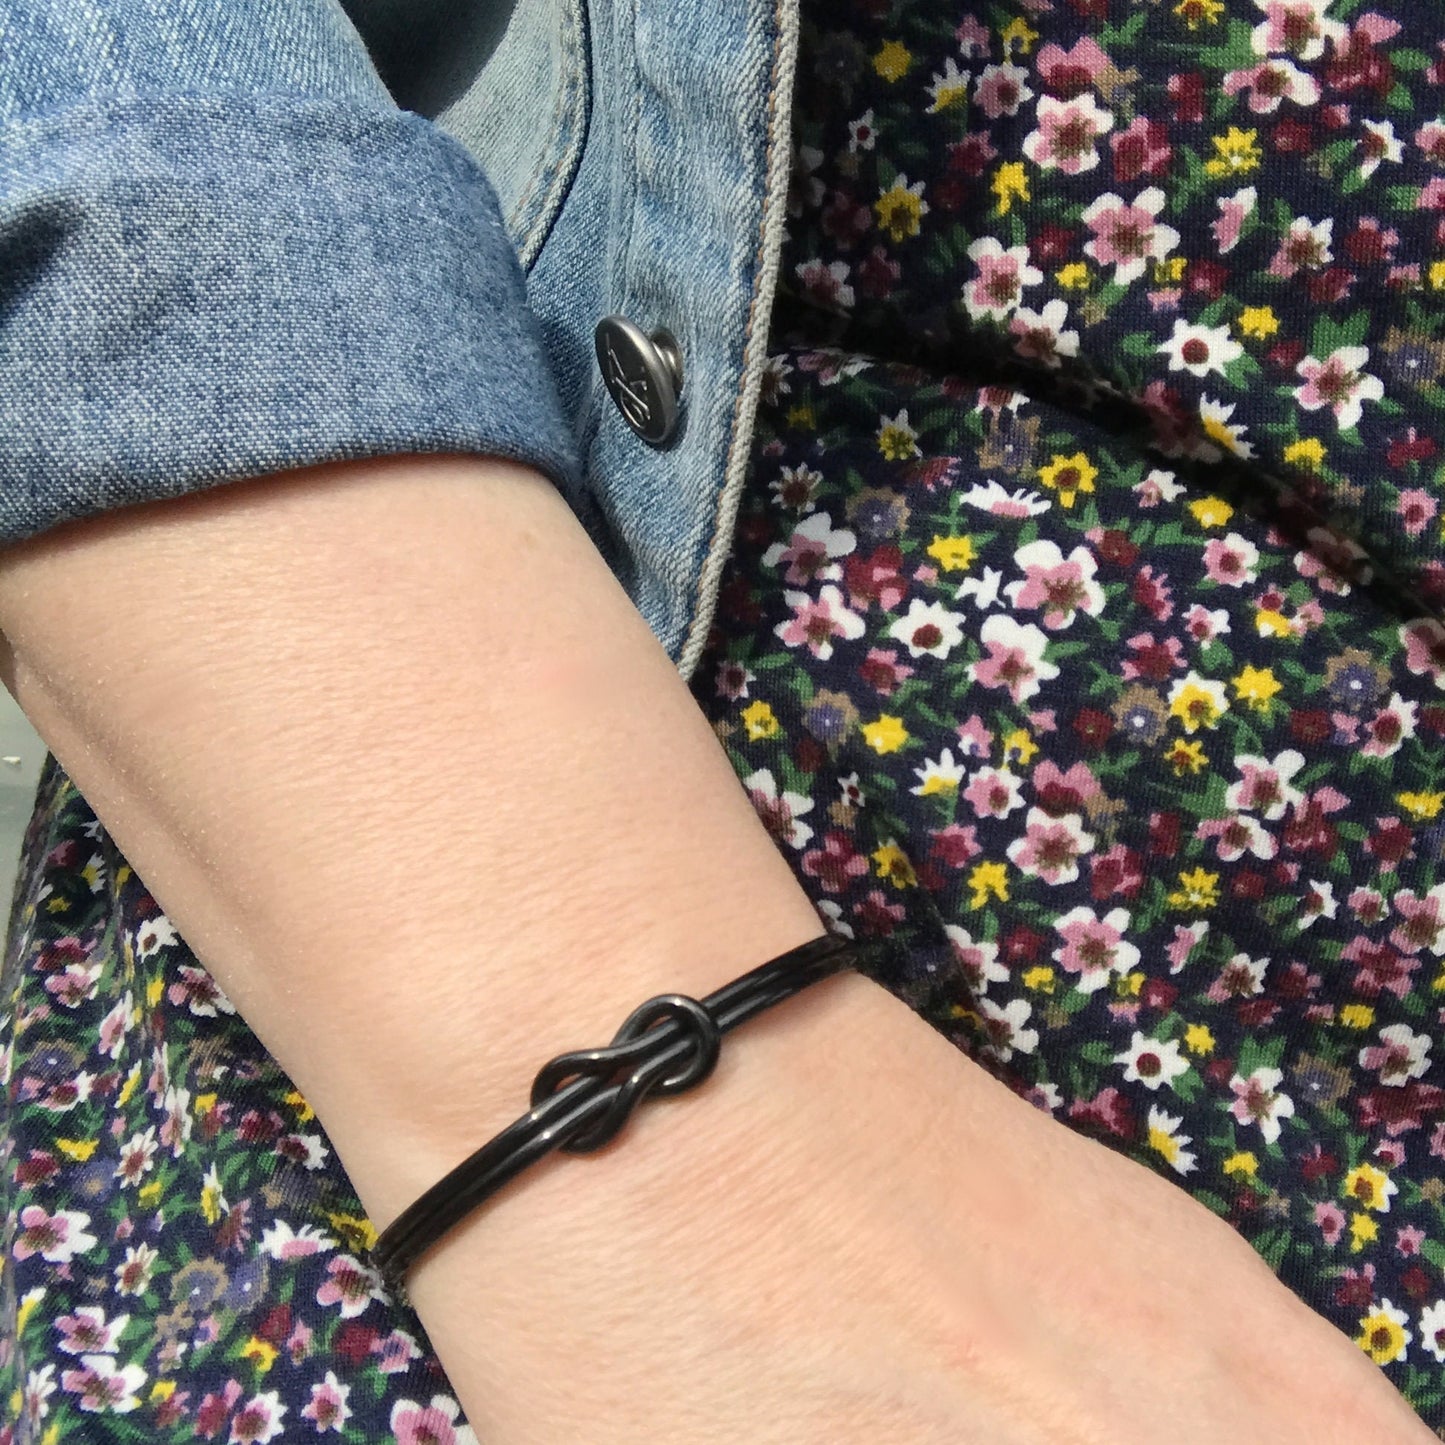 Black Square Knot Bracelet, Stainless Steel Wire Cuff, Infinity Jewelry, Metal Love Knot Symbol, Groomsmen Gift